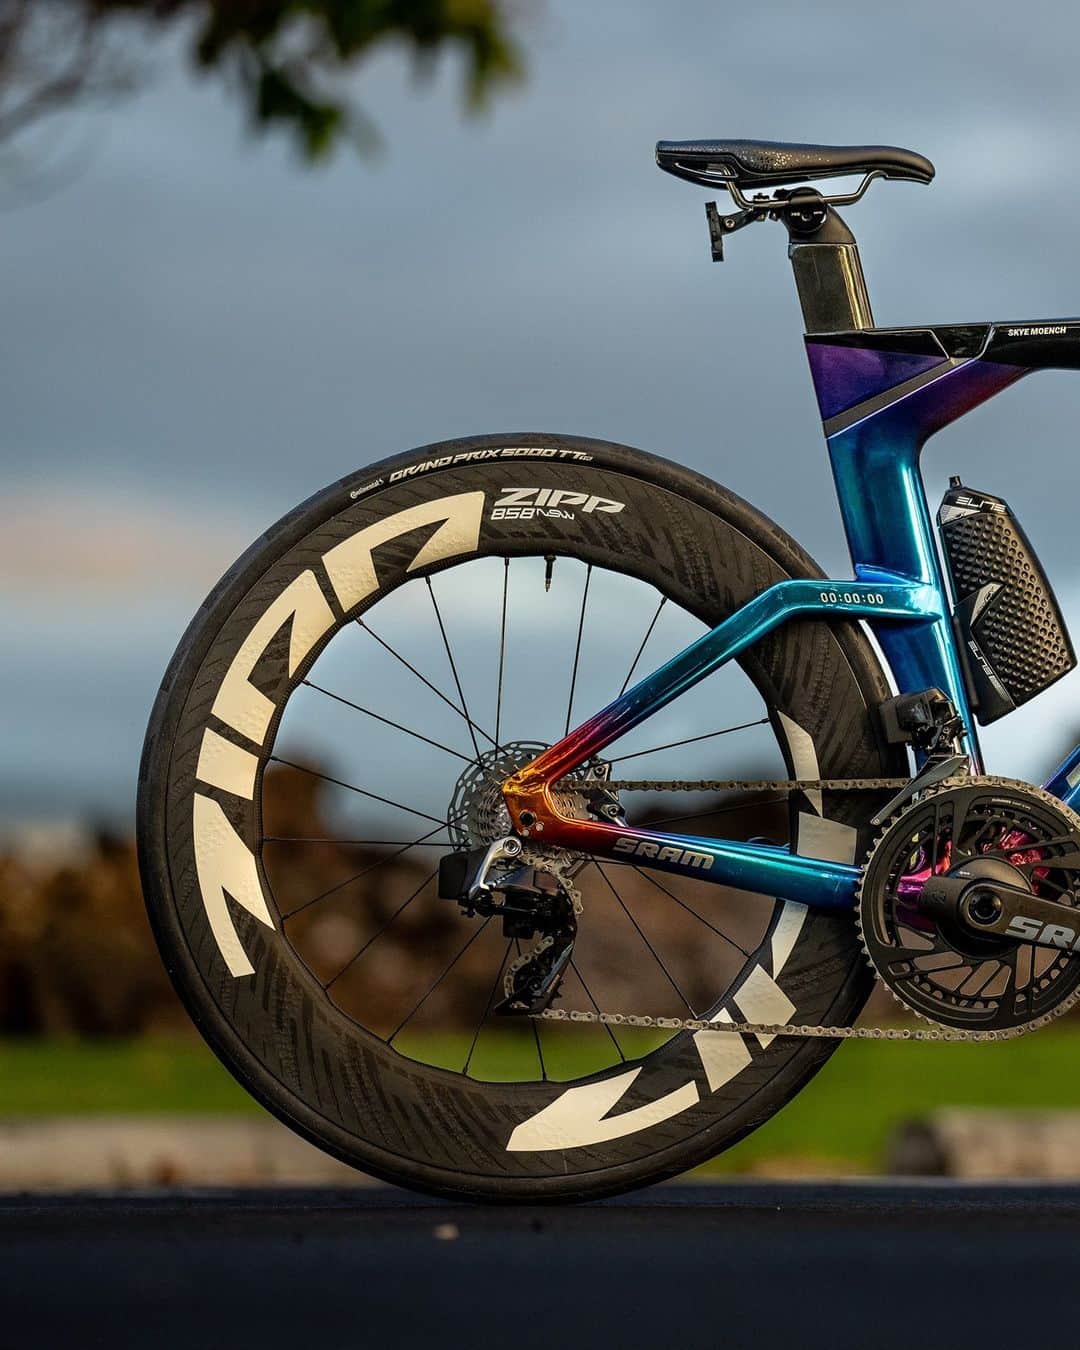 Zipp Speed Weaponryのインスタグラム：「@skyemoench finished a solid 7th place at this year's @ironmantri World Championships in Kona, HI aboard this stunning @trekbikes Speed Concept. In the latest installment of the Zipp Speed Podcast, we caught up with Skye to talk about her training and background in the sport, as well as the rise of tubeless set ups in triathlon and the importance of wheel choice. Head to the LINK IN BIO to hear from Skye!」